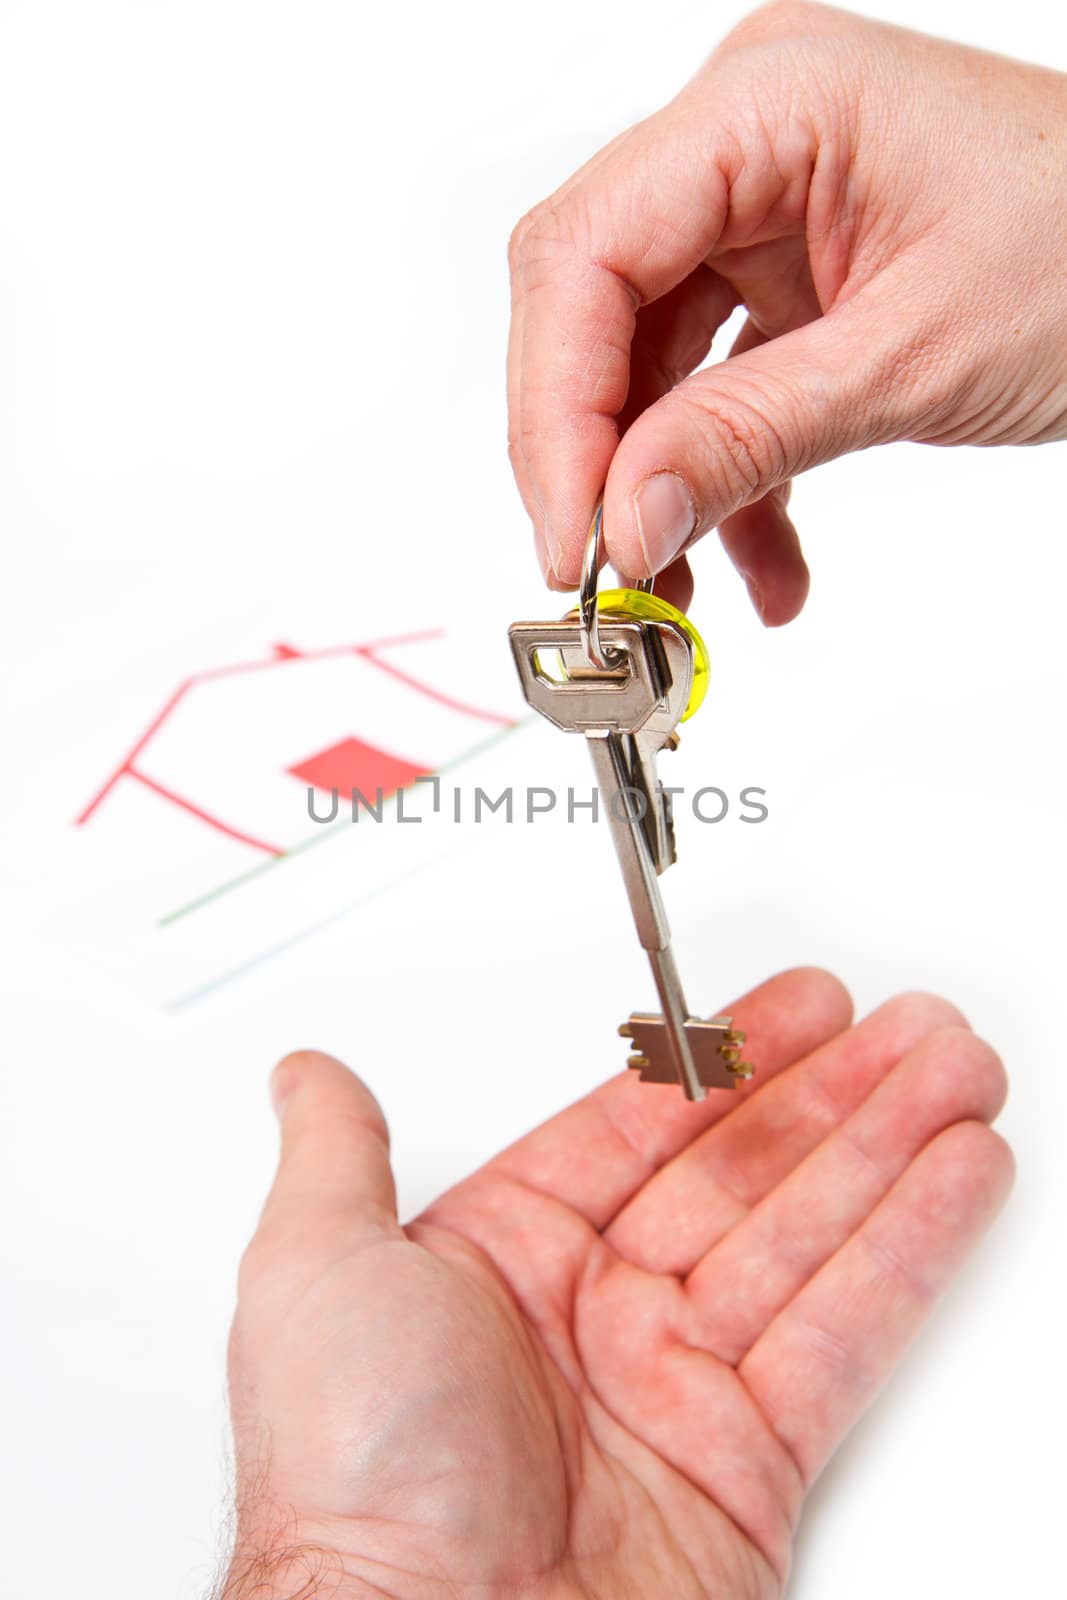 Human hands and key isolated on white background  by lsantilli